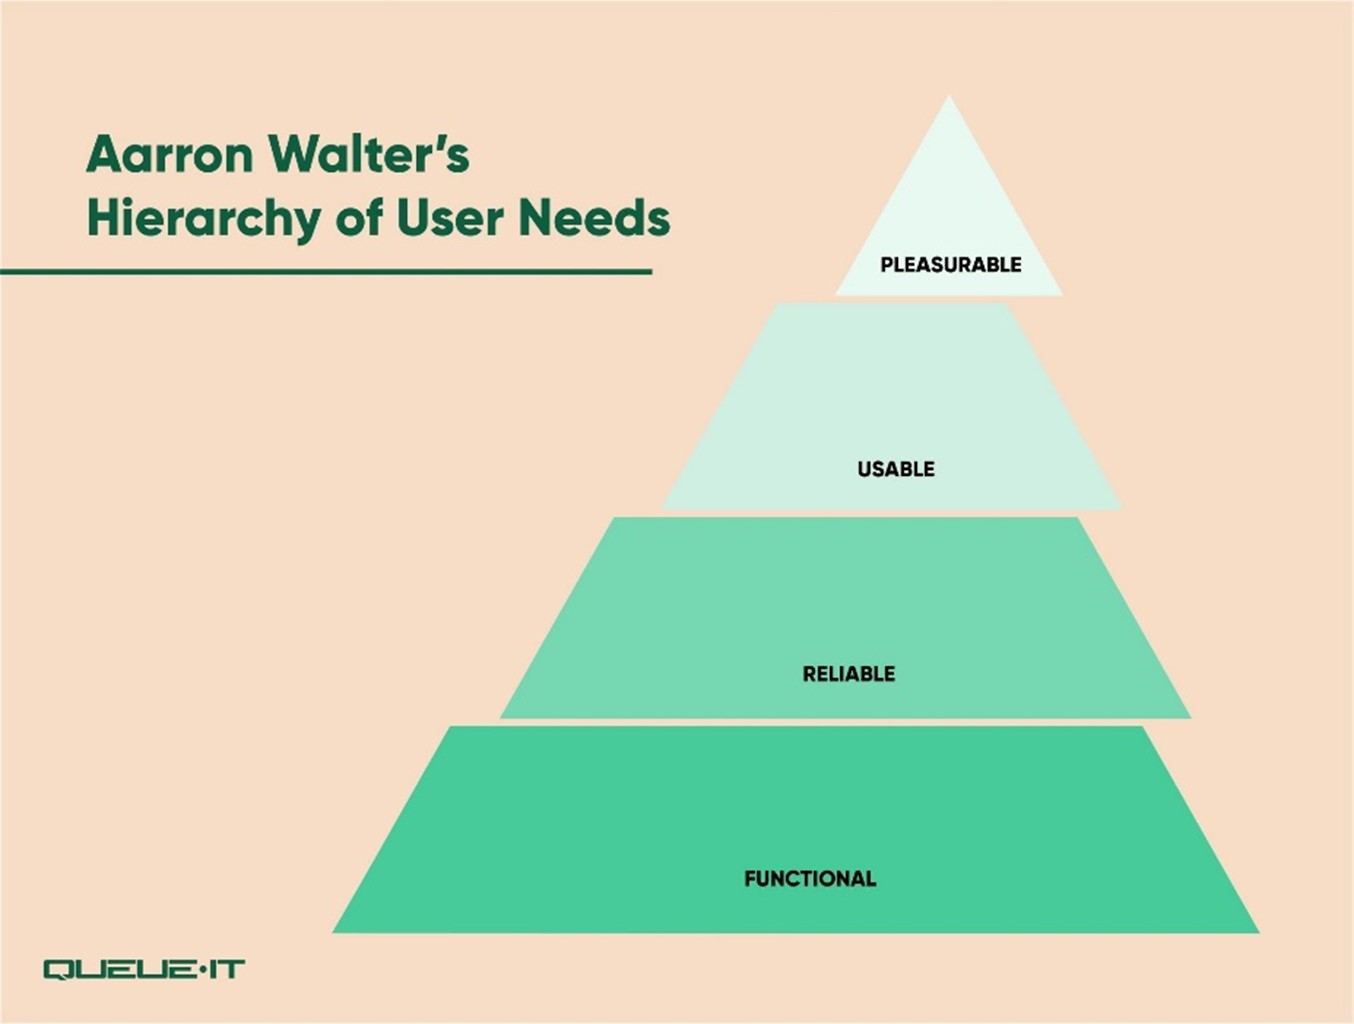 Pyramid showing user needs: functional, reliable, useable, pleasurable 